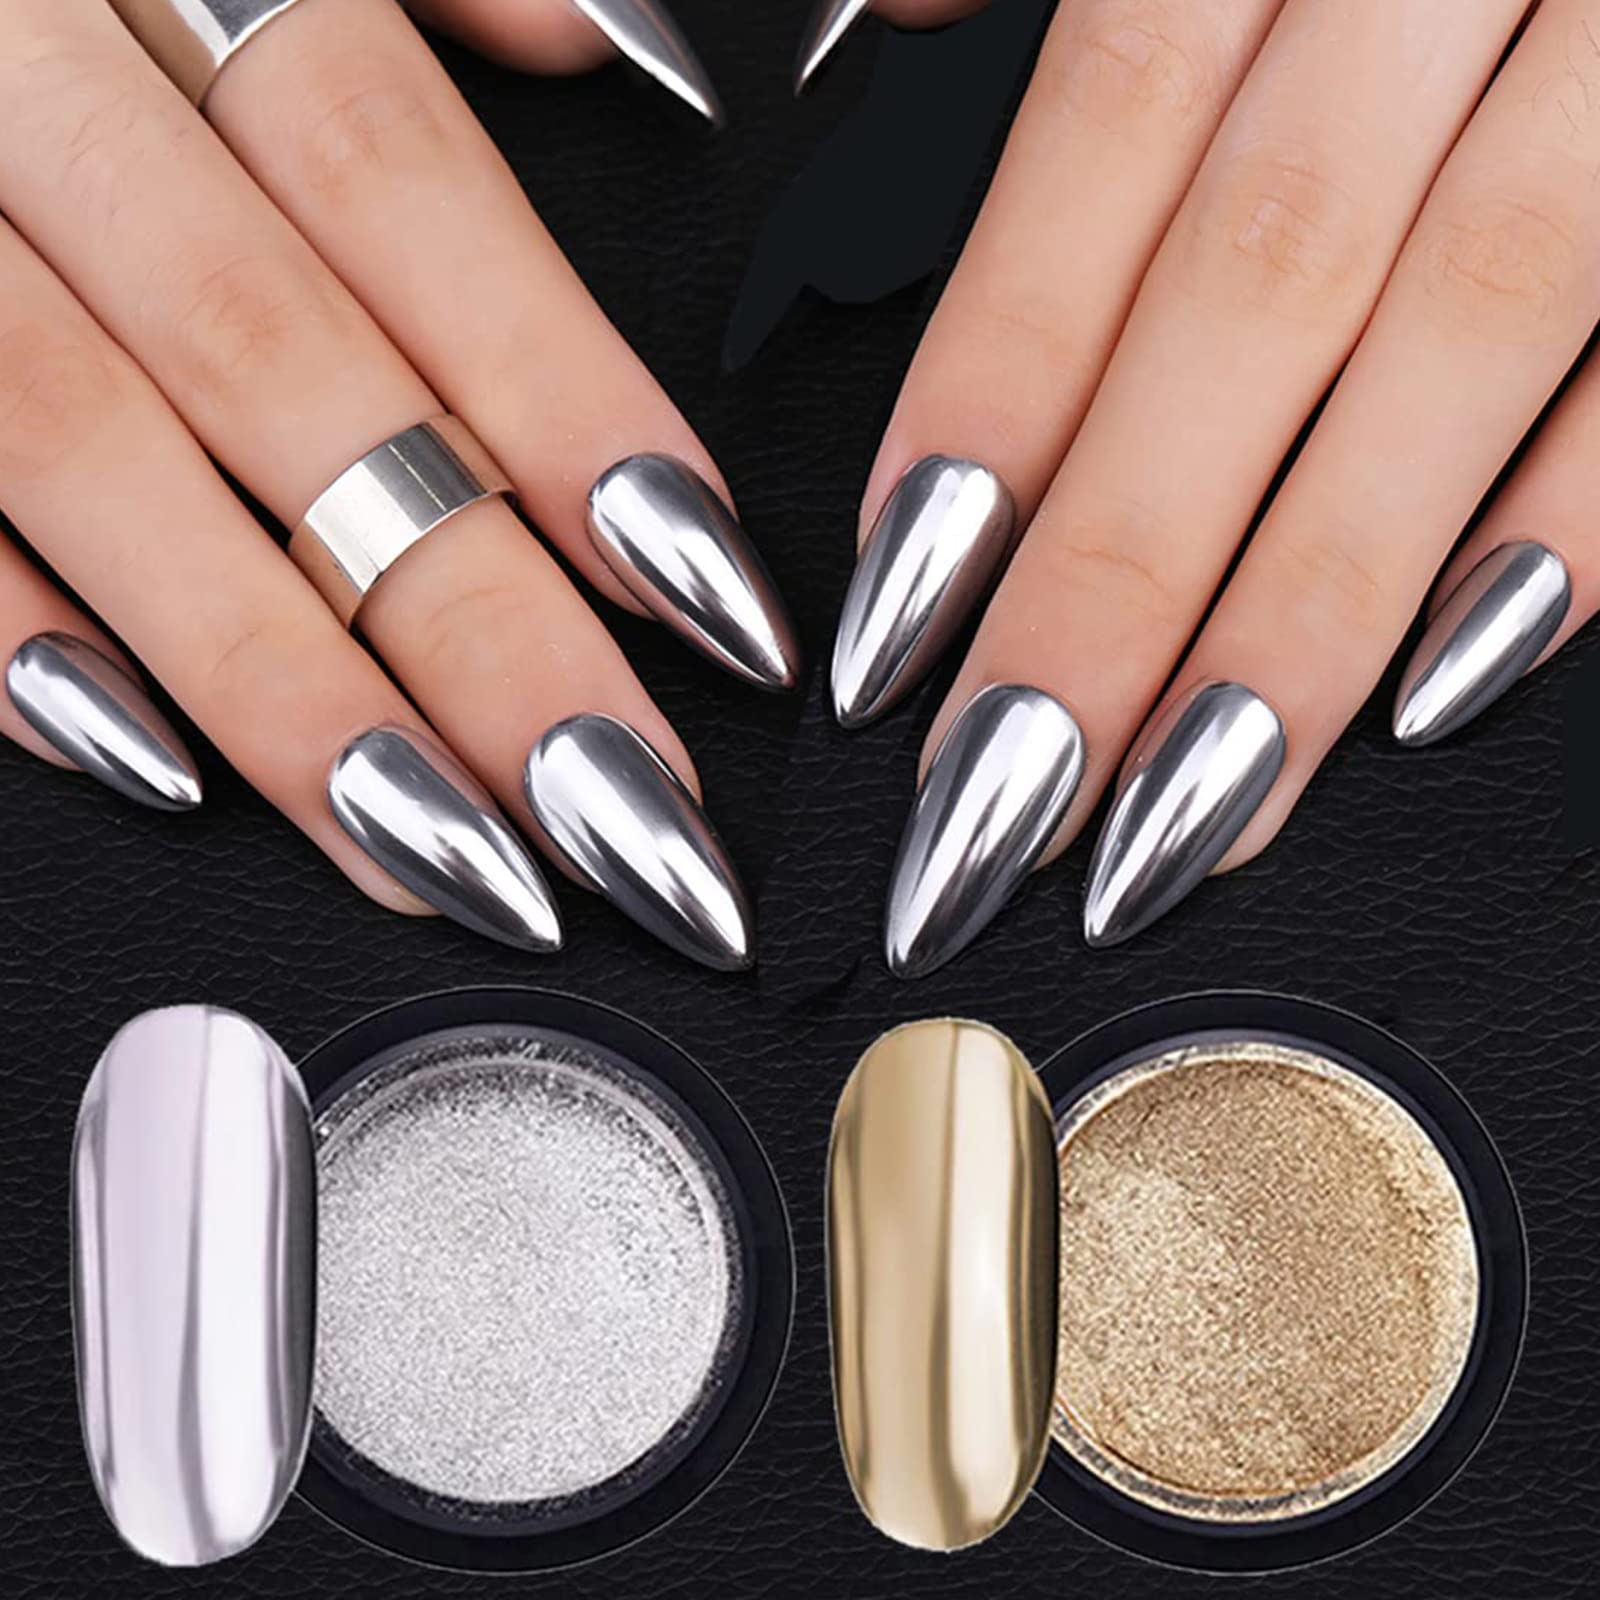 3 Colors Chrome Nail Powder Set Reflective Glitter Metallic Mirror Effect  for Nails Art Design 3D Holographic Silver Rose Gold Pigment Flash Light